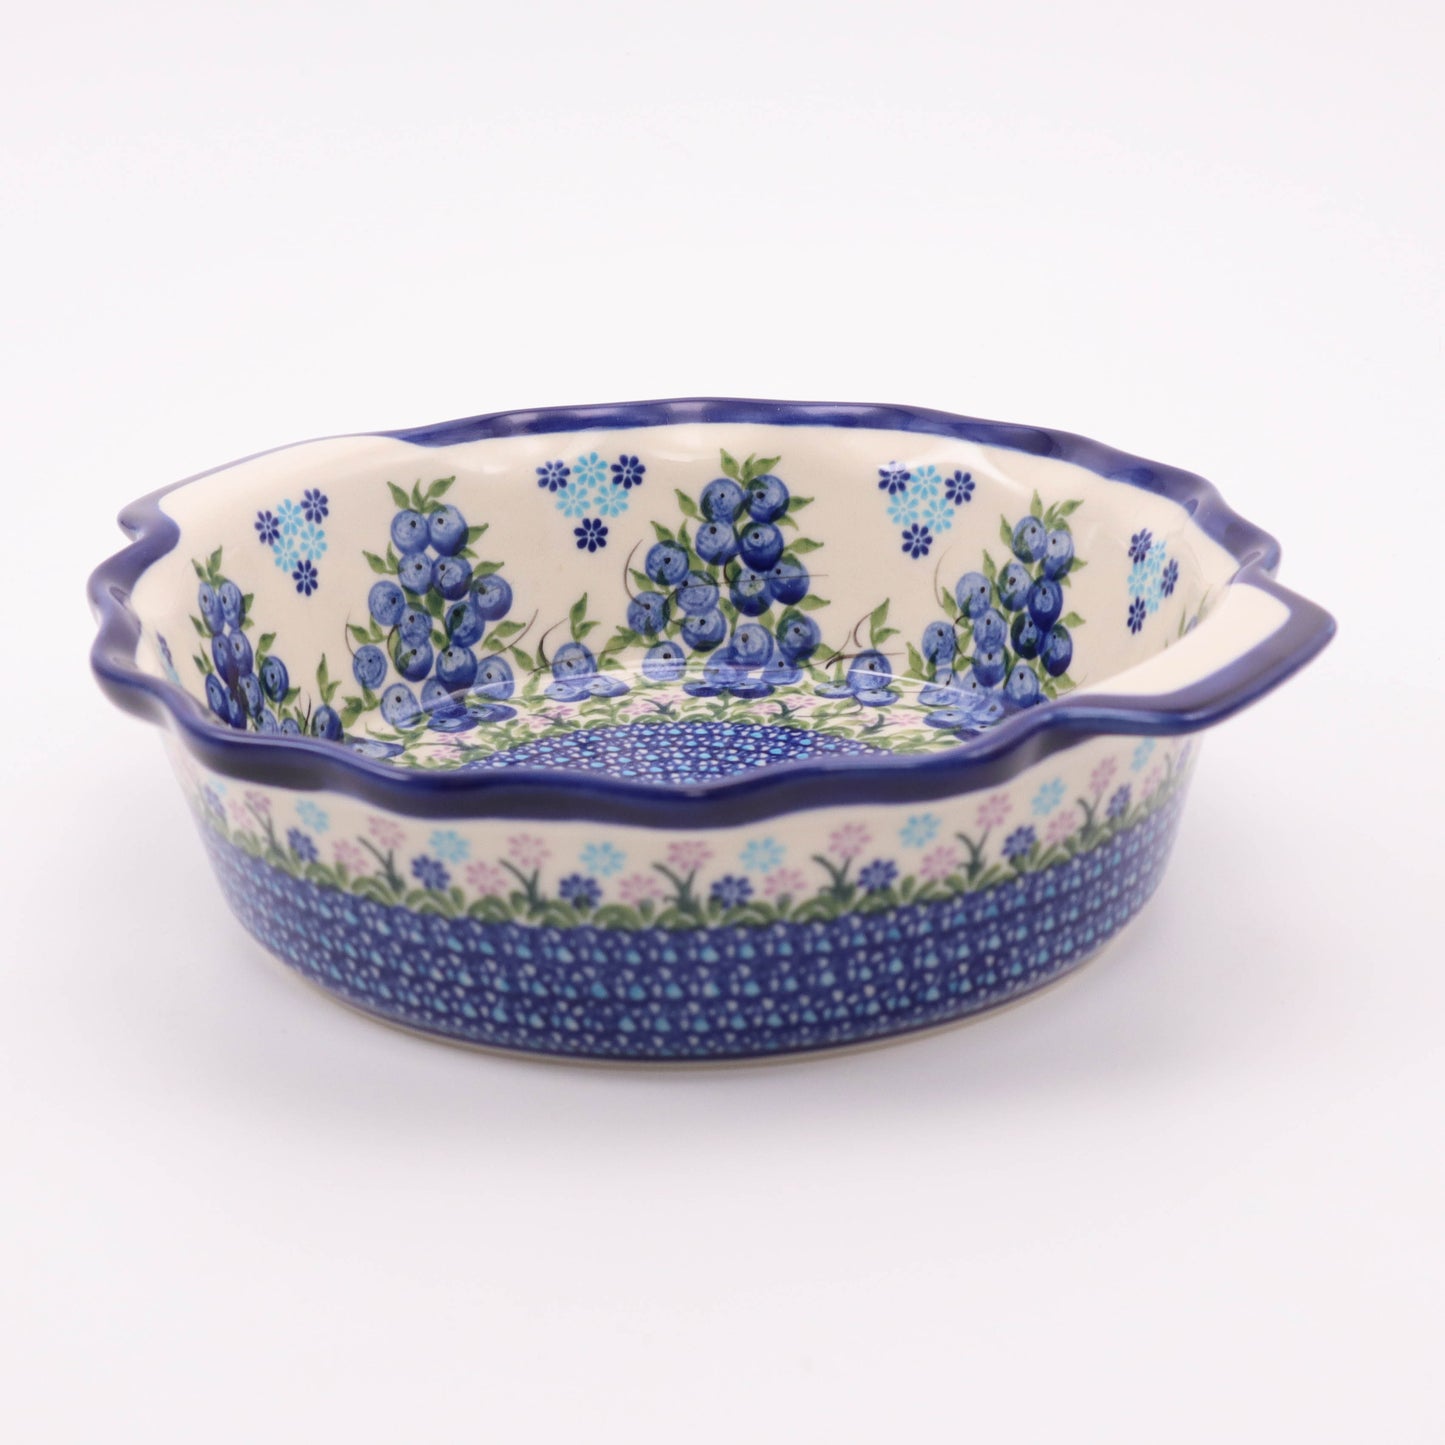 9.5" Round Waved Bowl with Handles. Pattern: Blueberries